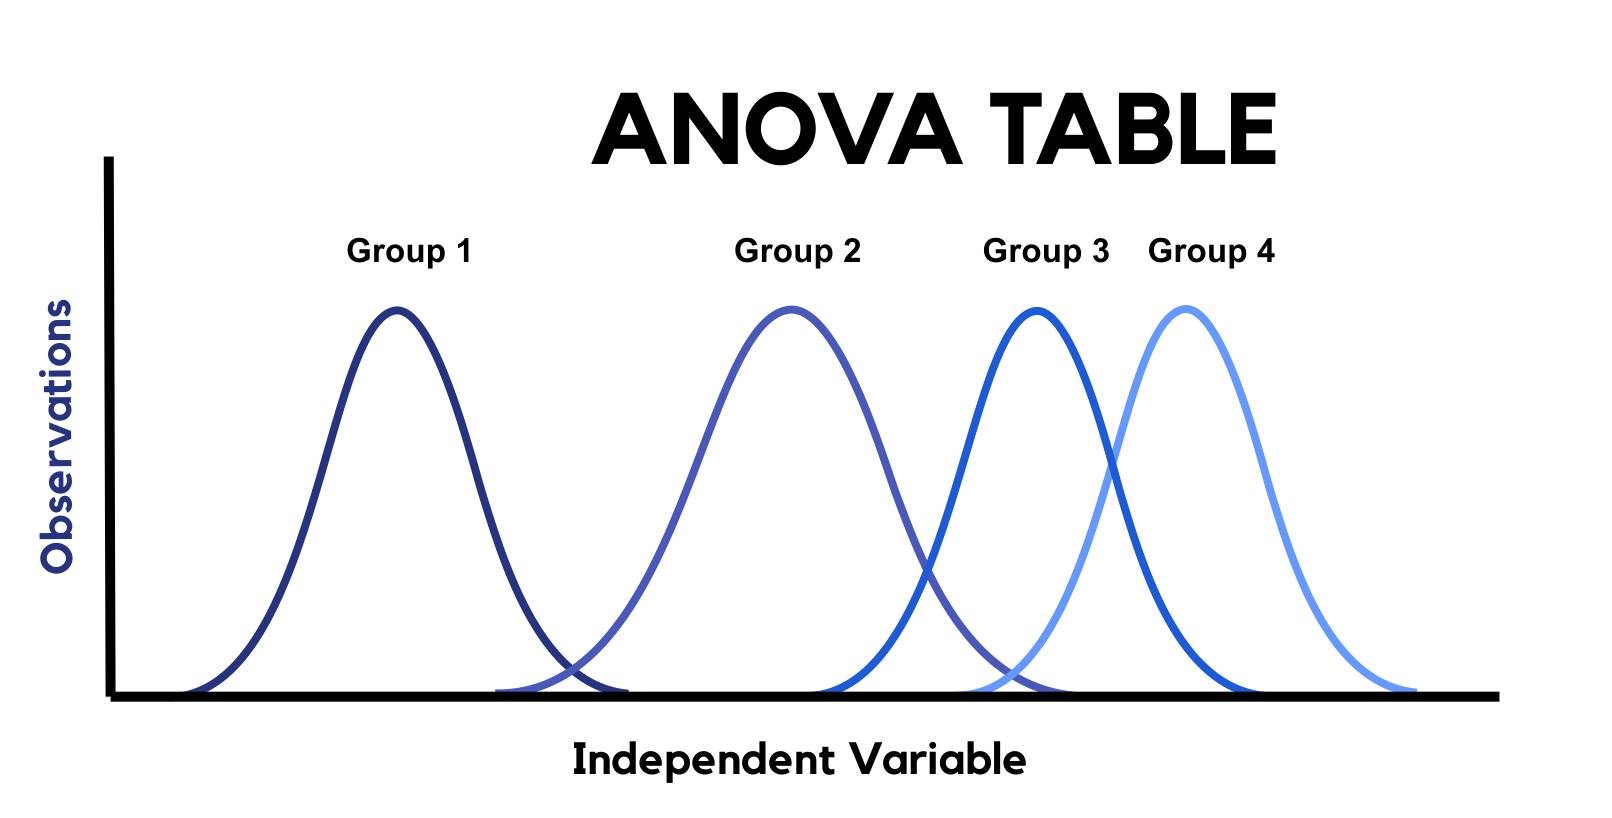 Comparison Of Population Means With Anova Table